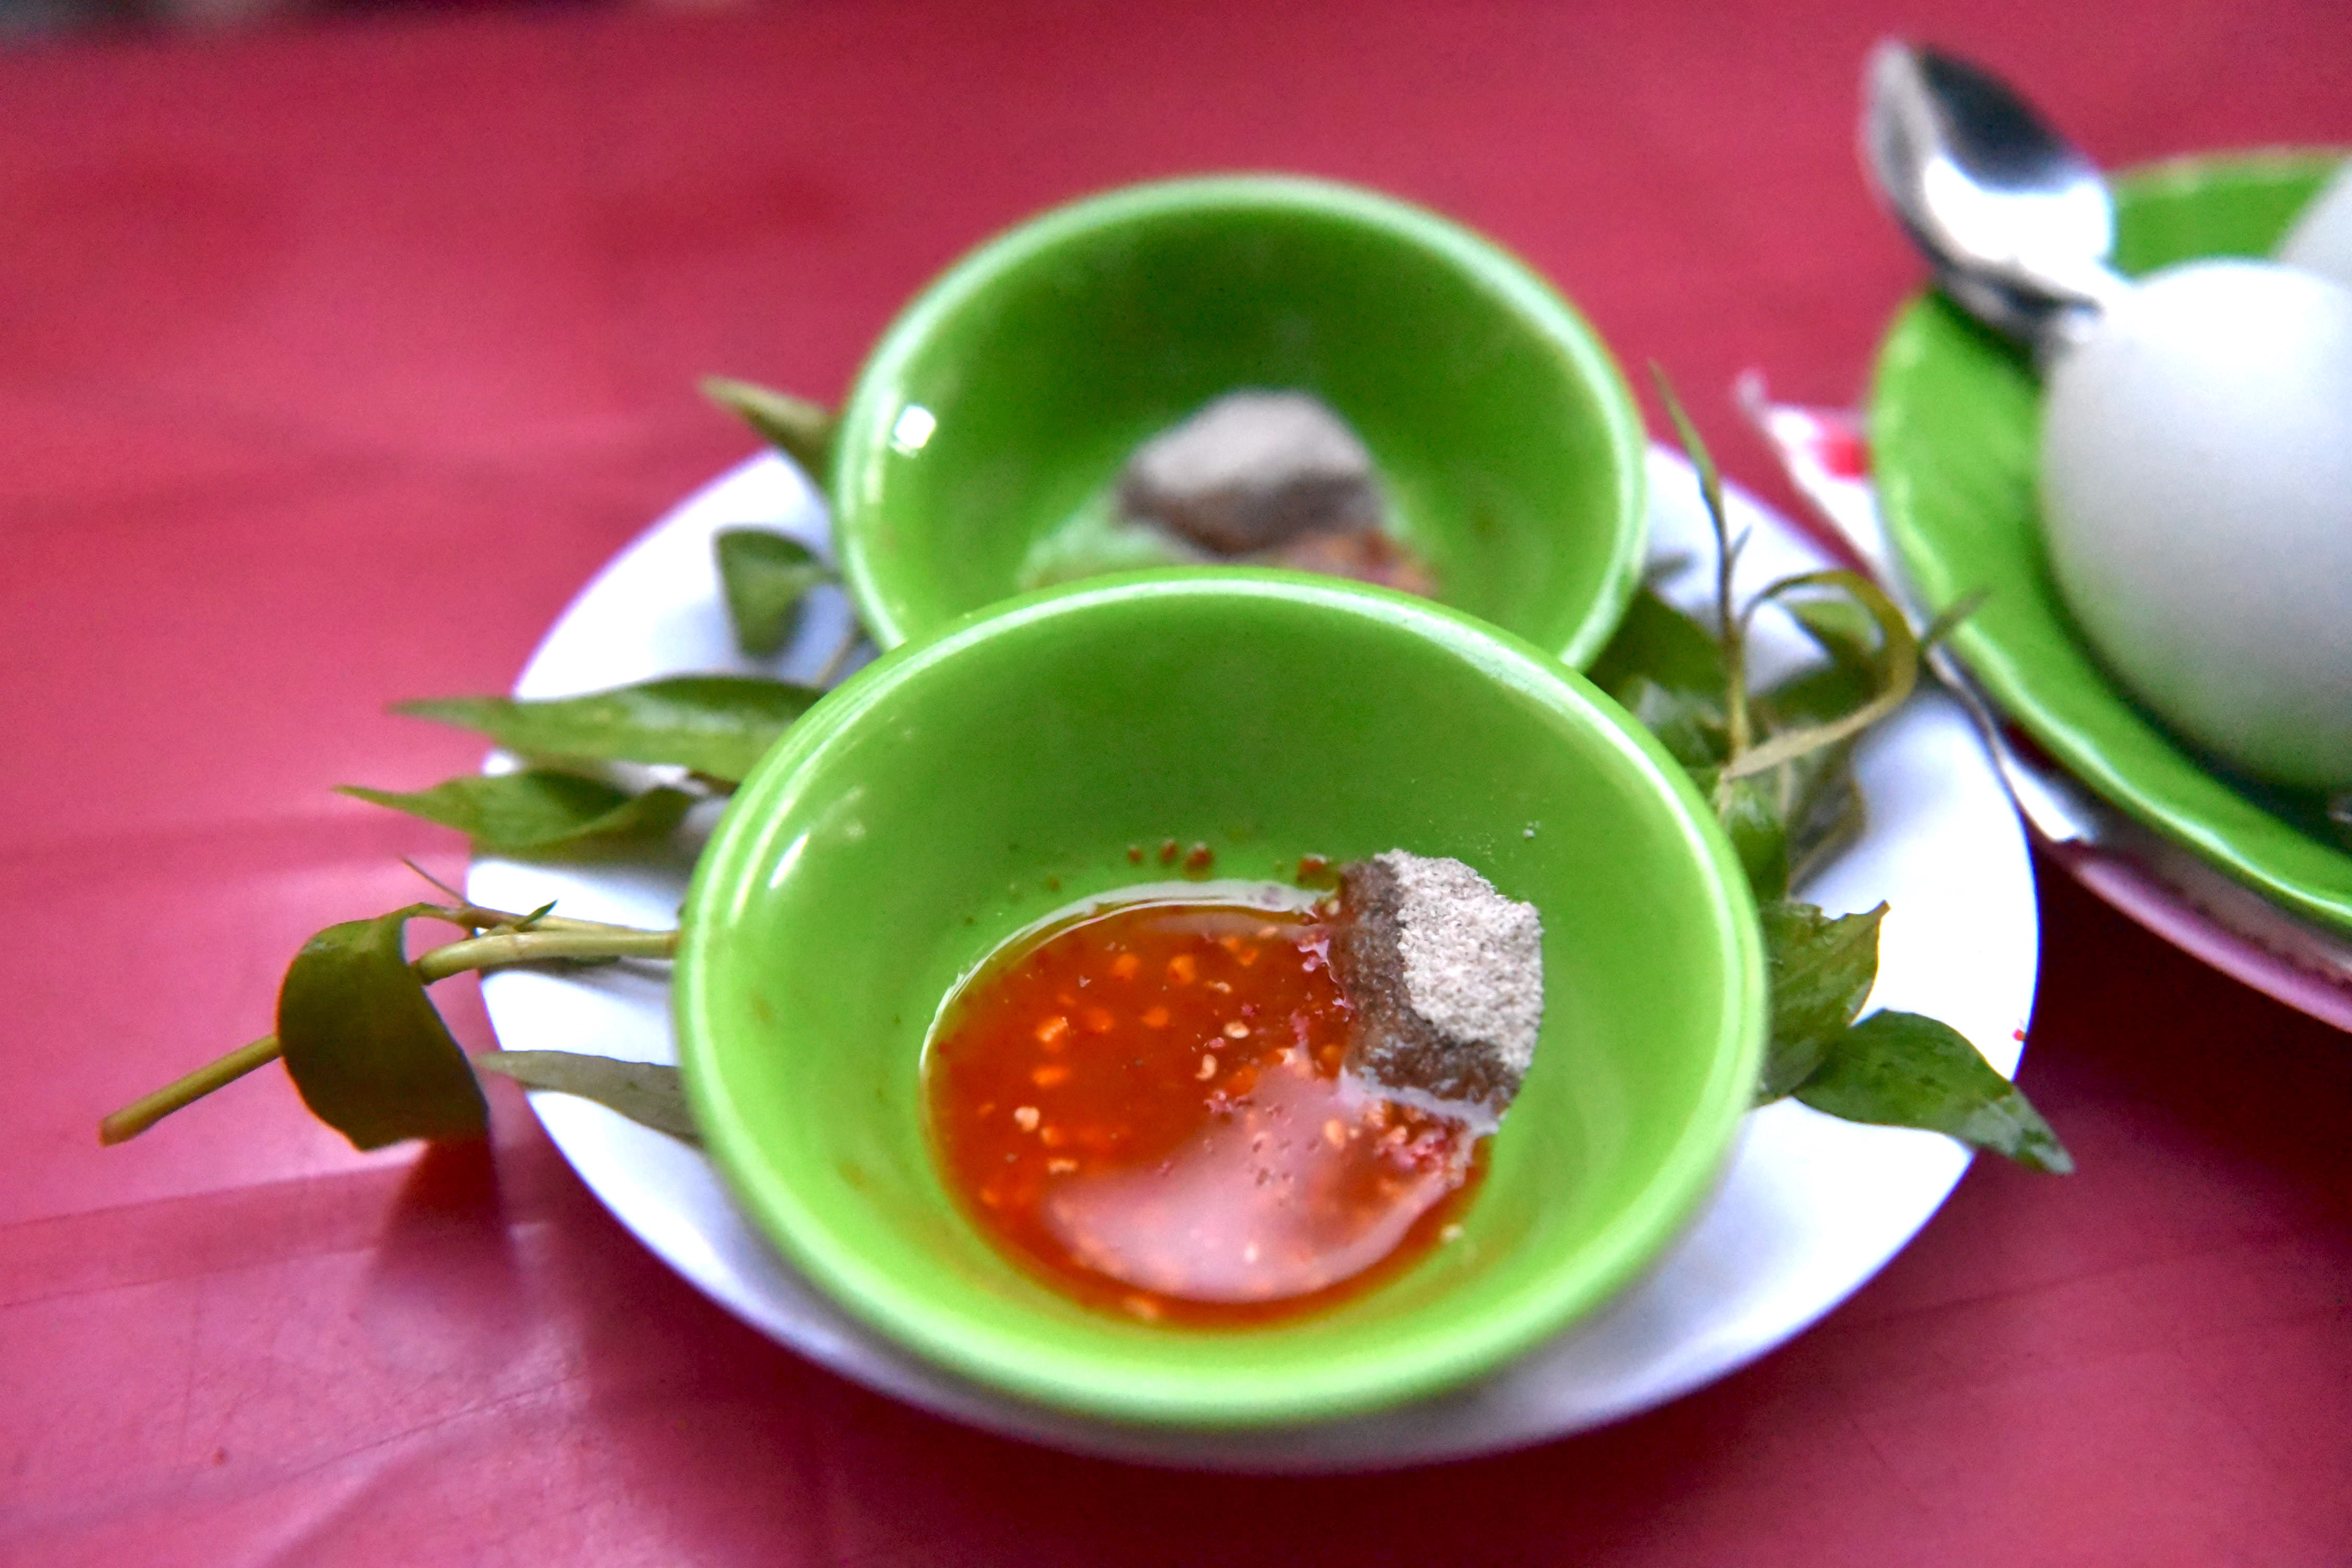 Teh dipping sauce served with balut at Kim Thao stall in Thao Dien, Thu Duc City. Photo: Ngoc Phuong / Tuoi Tre News